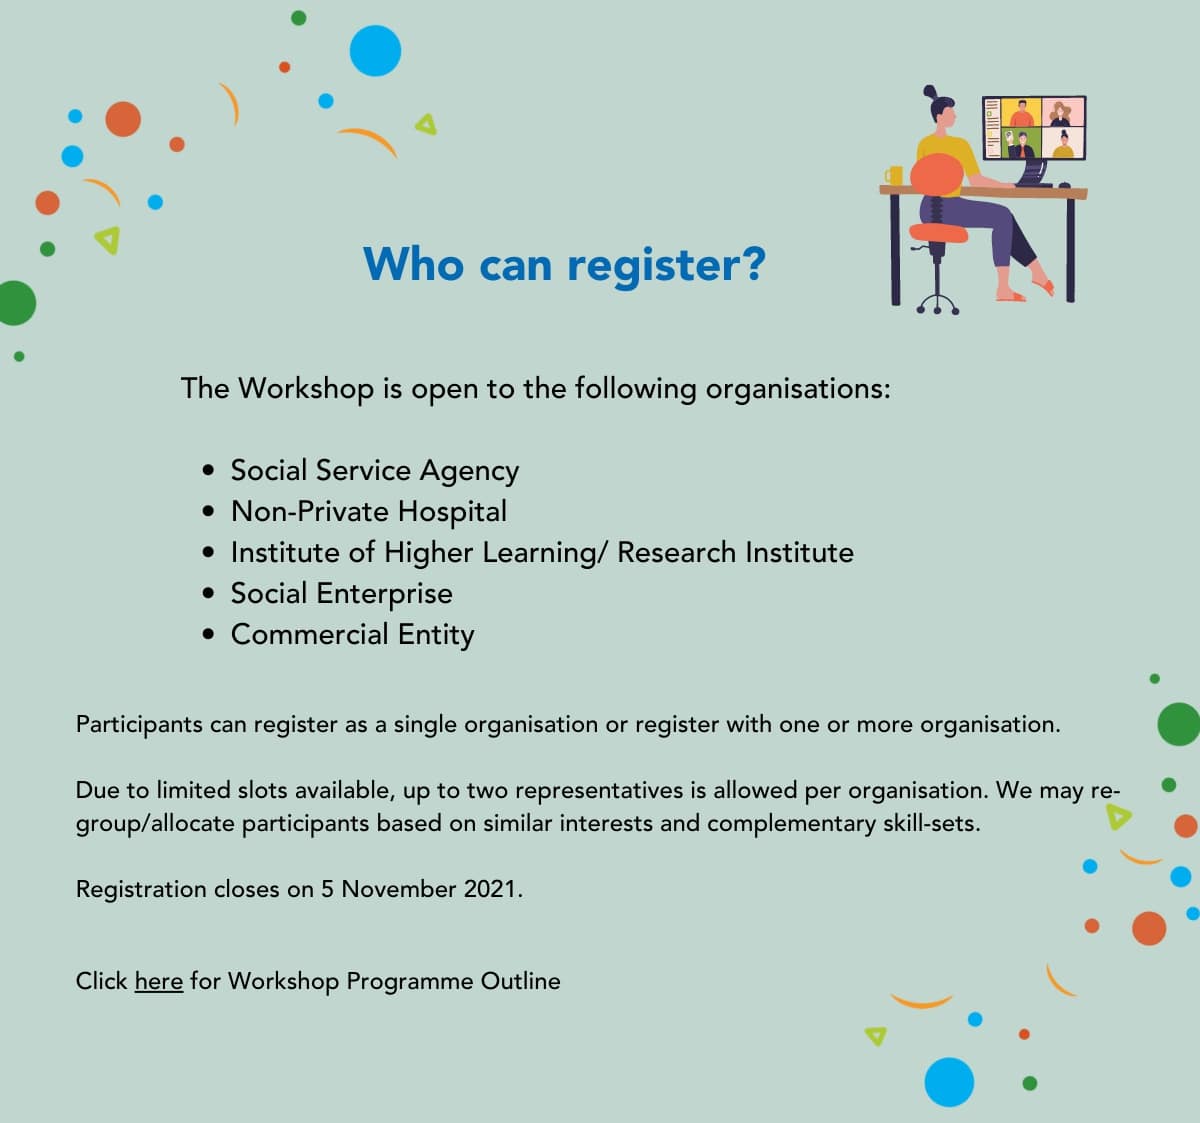 Who can register? The Workshop is open to the following organisations- Social Service Agency, Non-Private Hospital, Institute of Higher Learning/ Research Institute, Social Enterprise, Commercial Entity. Participants can register as a single organisation or register with at least one other organization. Due to limited slots available, up to two representatives is allowed per organisation. We may re-group/ allocate participants based on similar interests and complementary skill-sets. Registration closes on 5 November. Click here (this is a link for Workshop Programme Outline document) for Workshop Programme Outline.